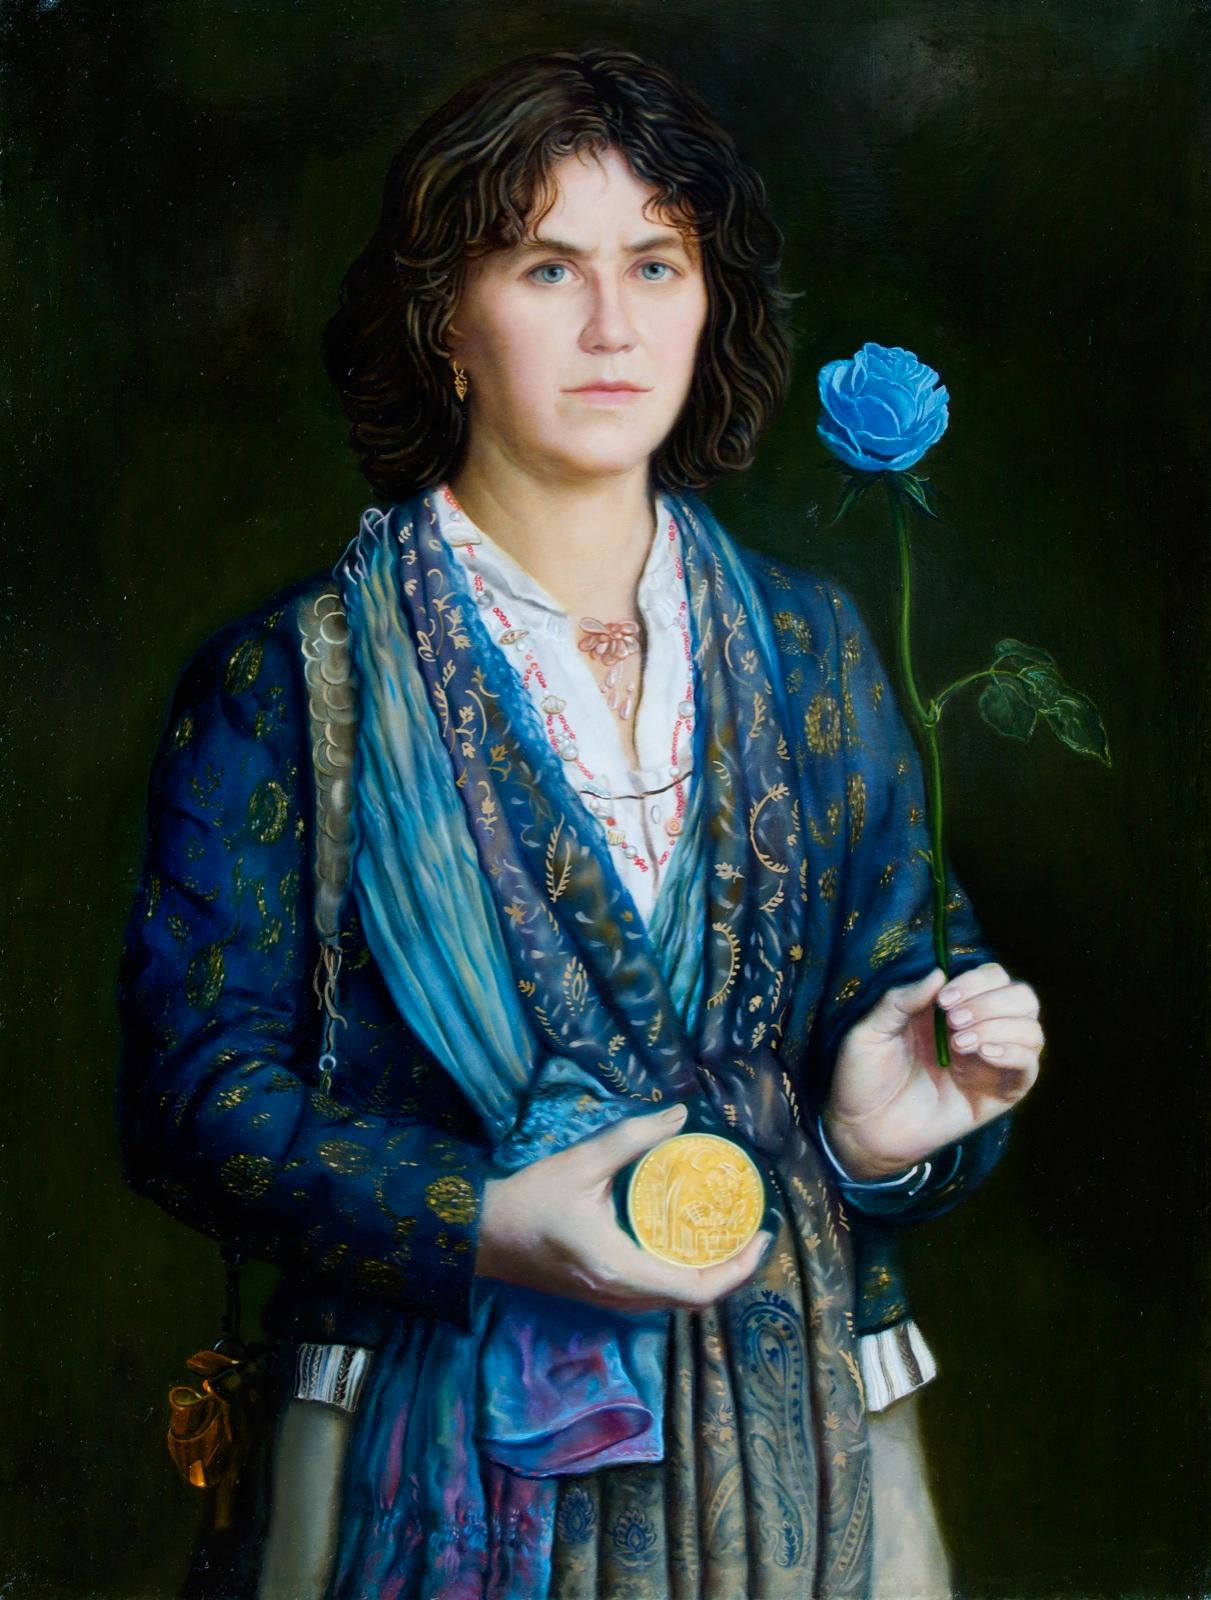 The portrait with blue rose and Paris medal. Original modern art painting